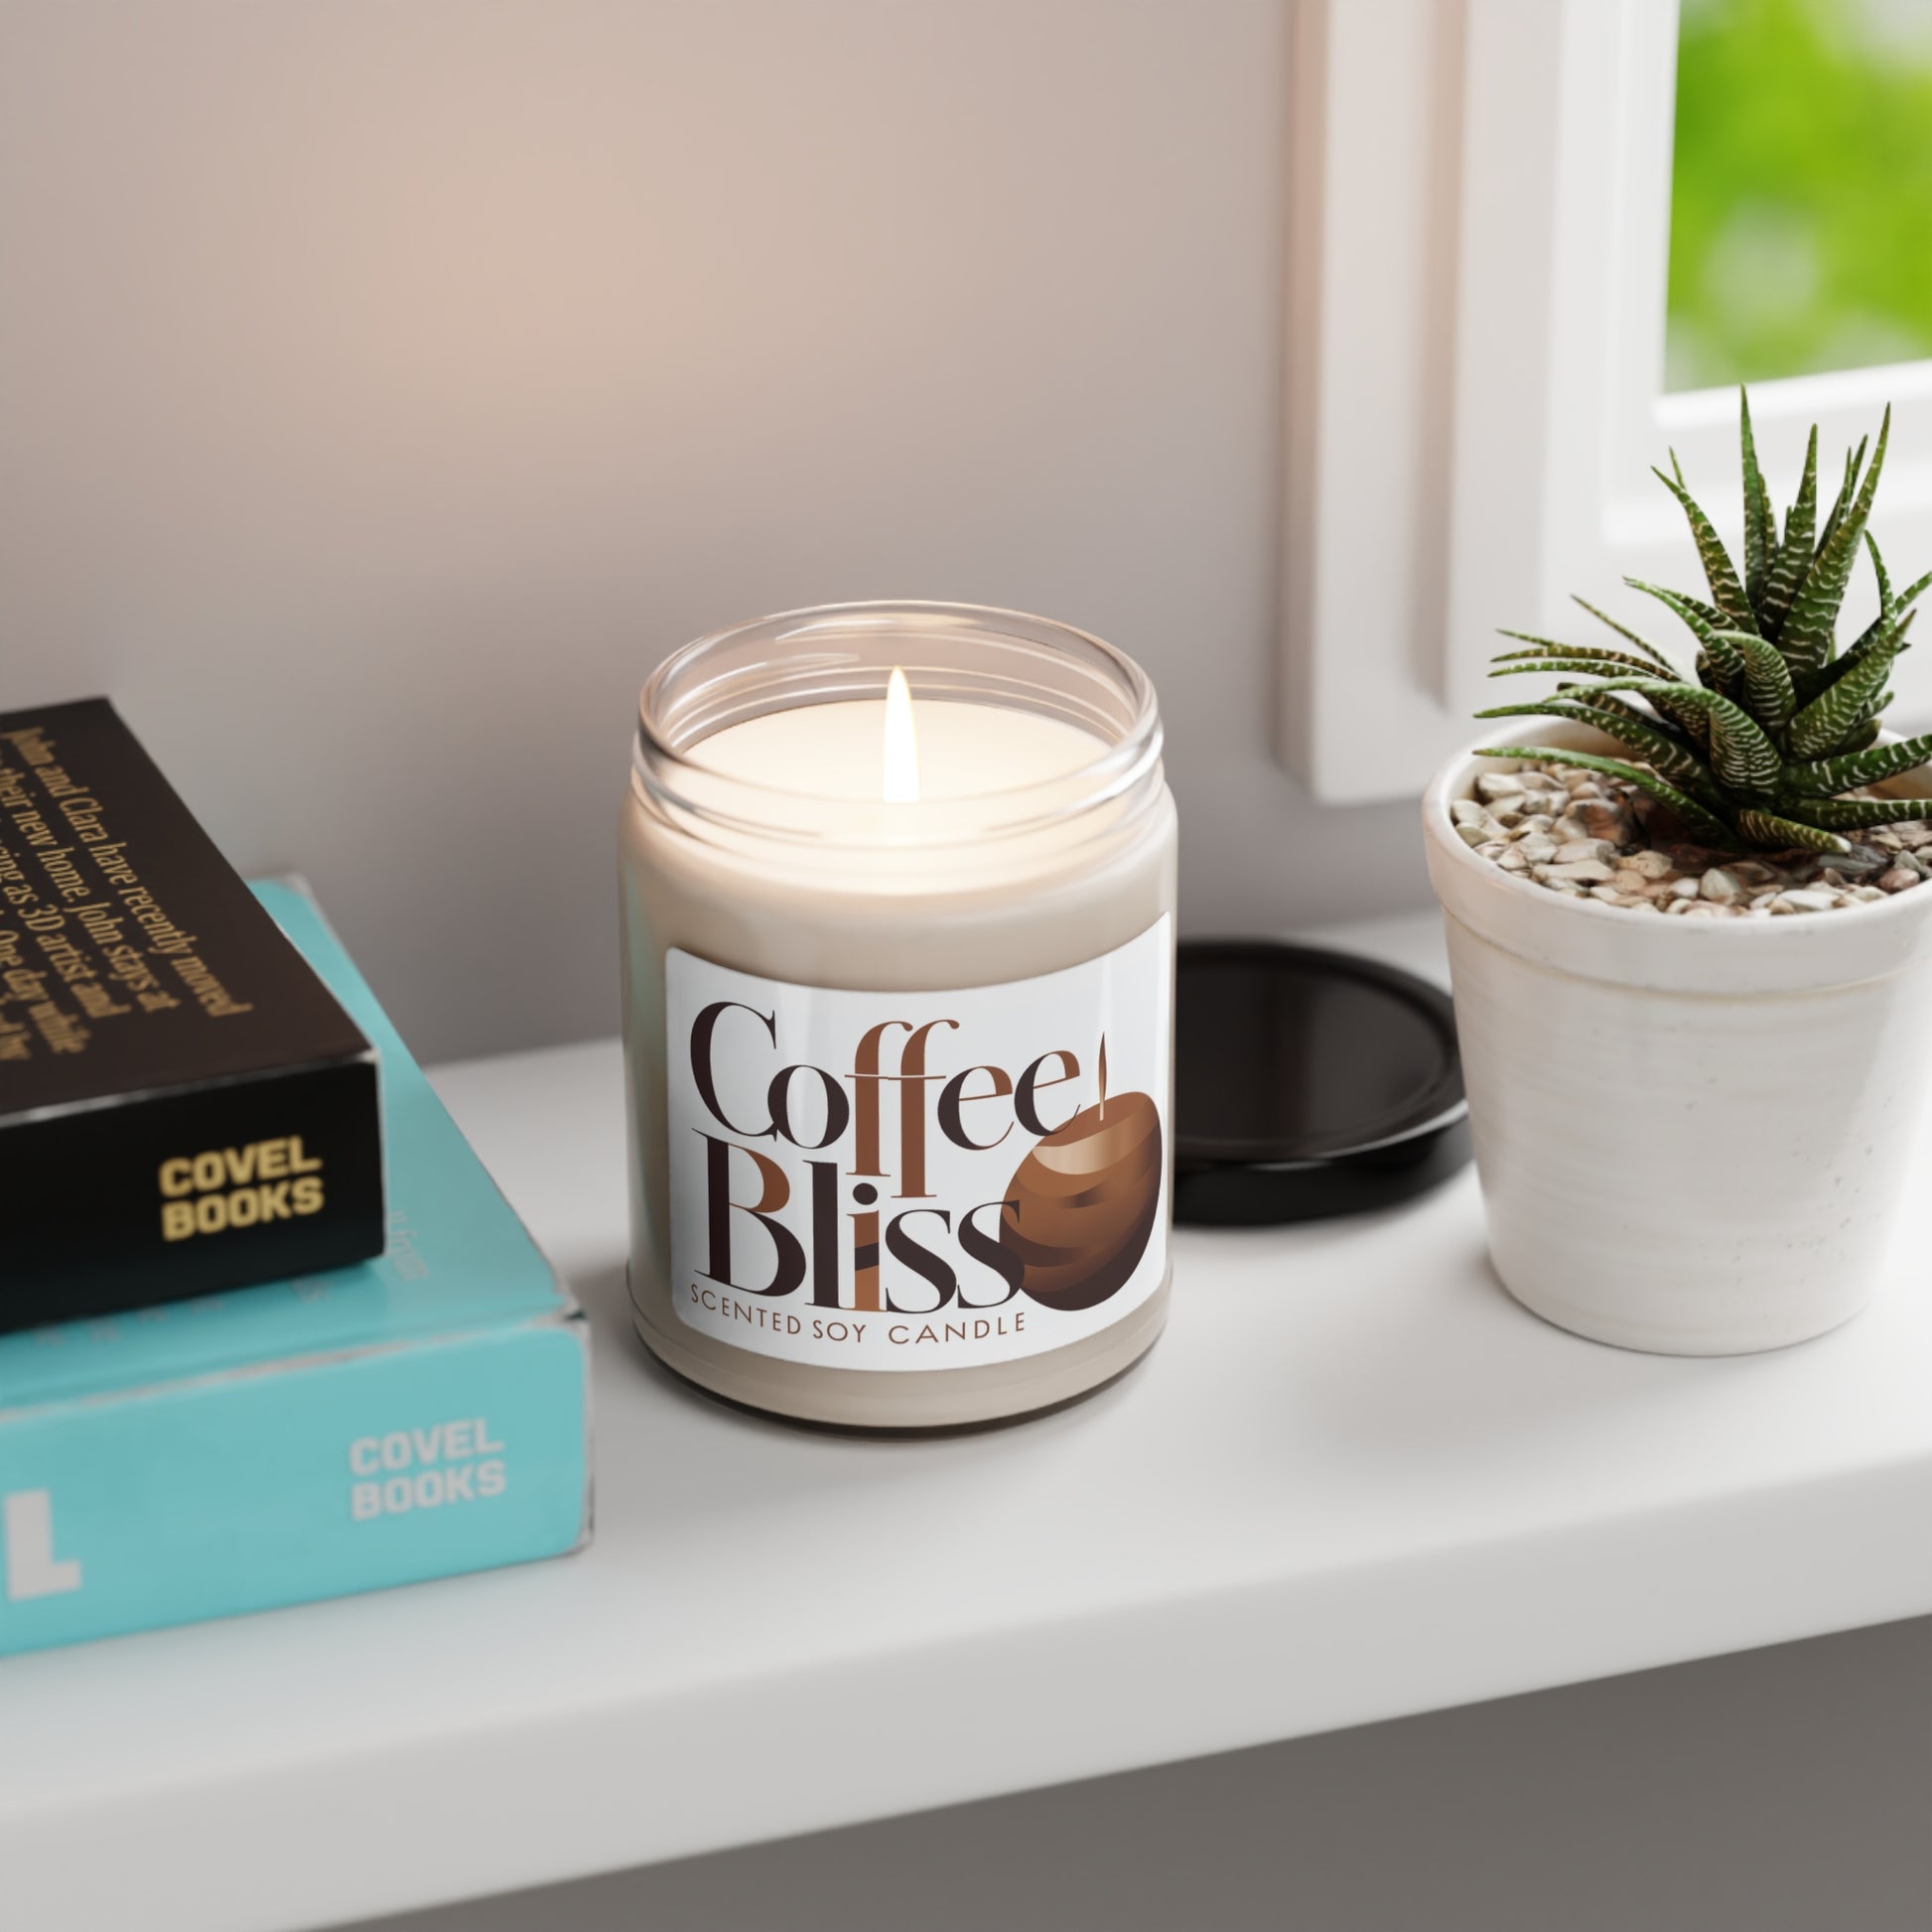 "Coffee Bliss" Scented Soy Candle, 9oz | Coffee Time Classics - Coffee Time Classics